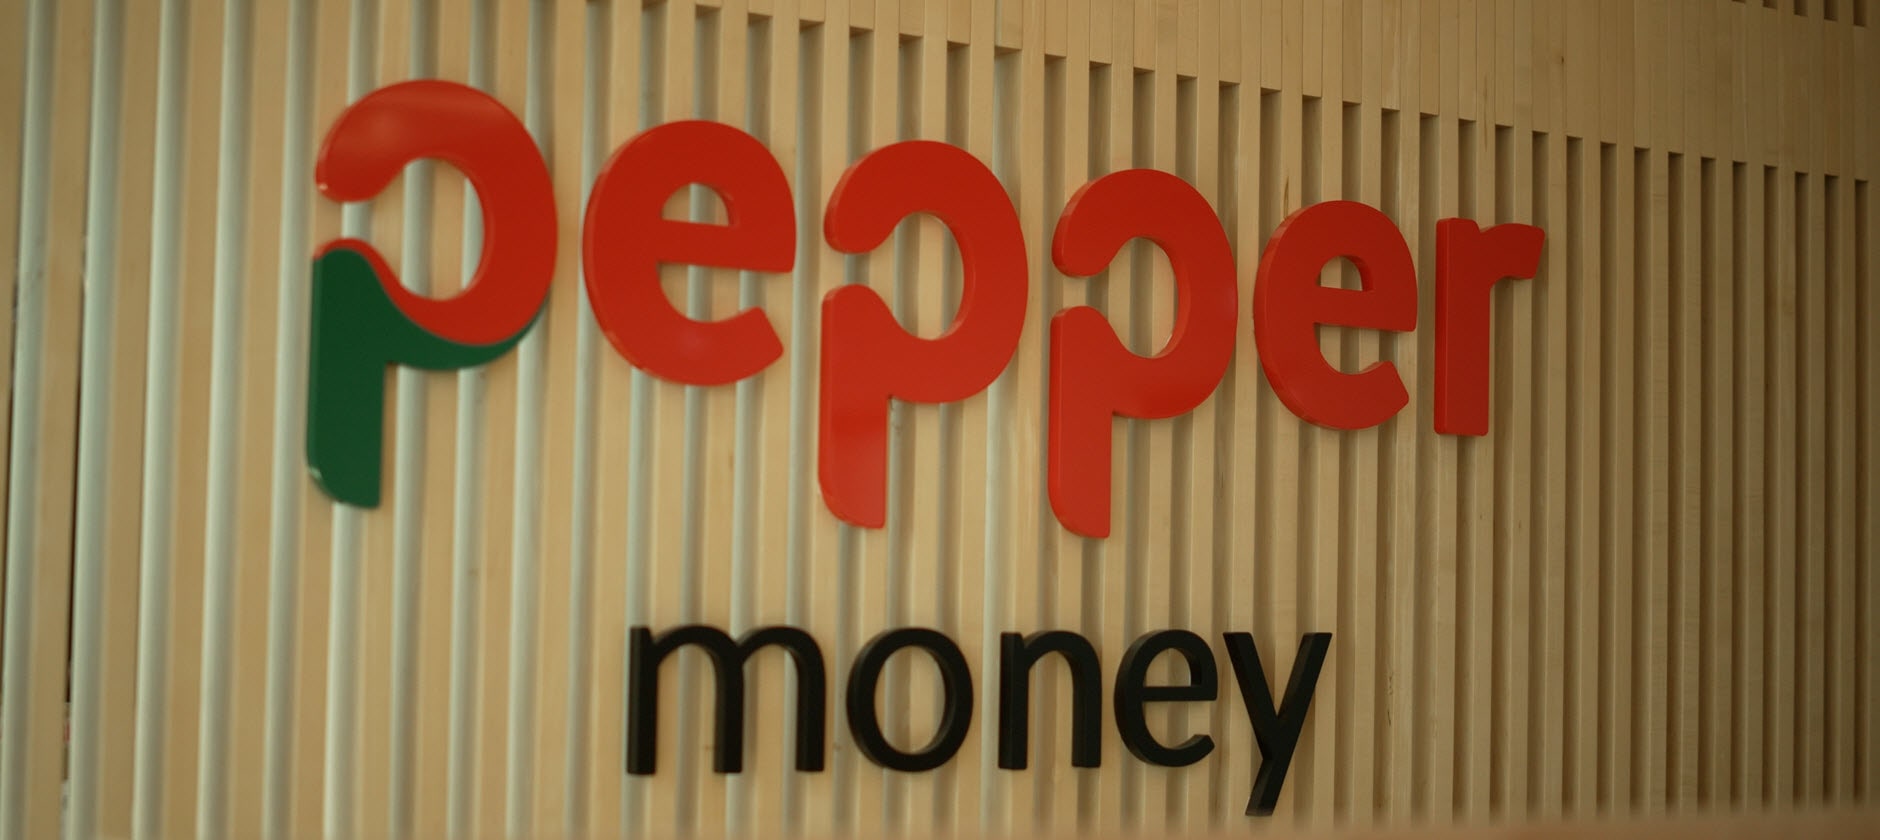 Partnering with Pepper Money to improve the valuation experience